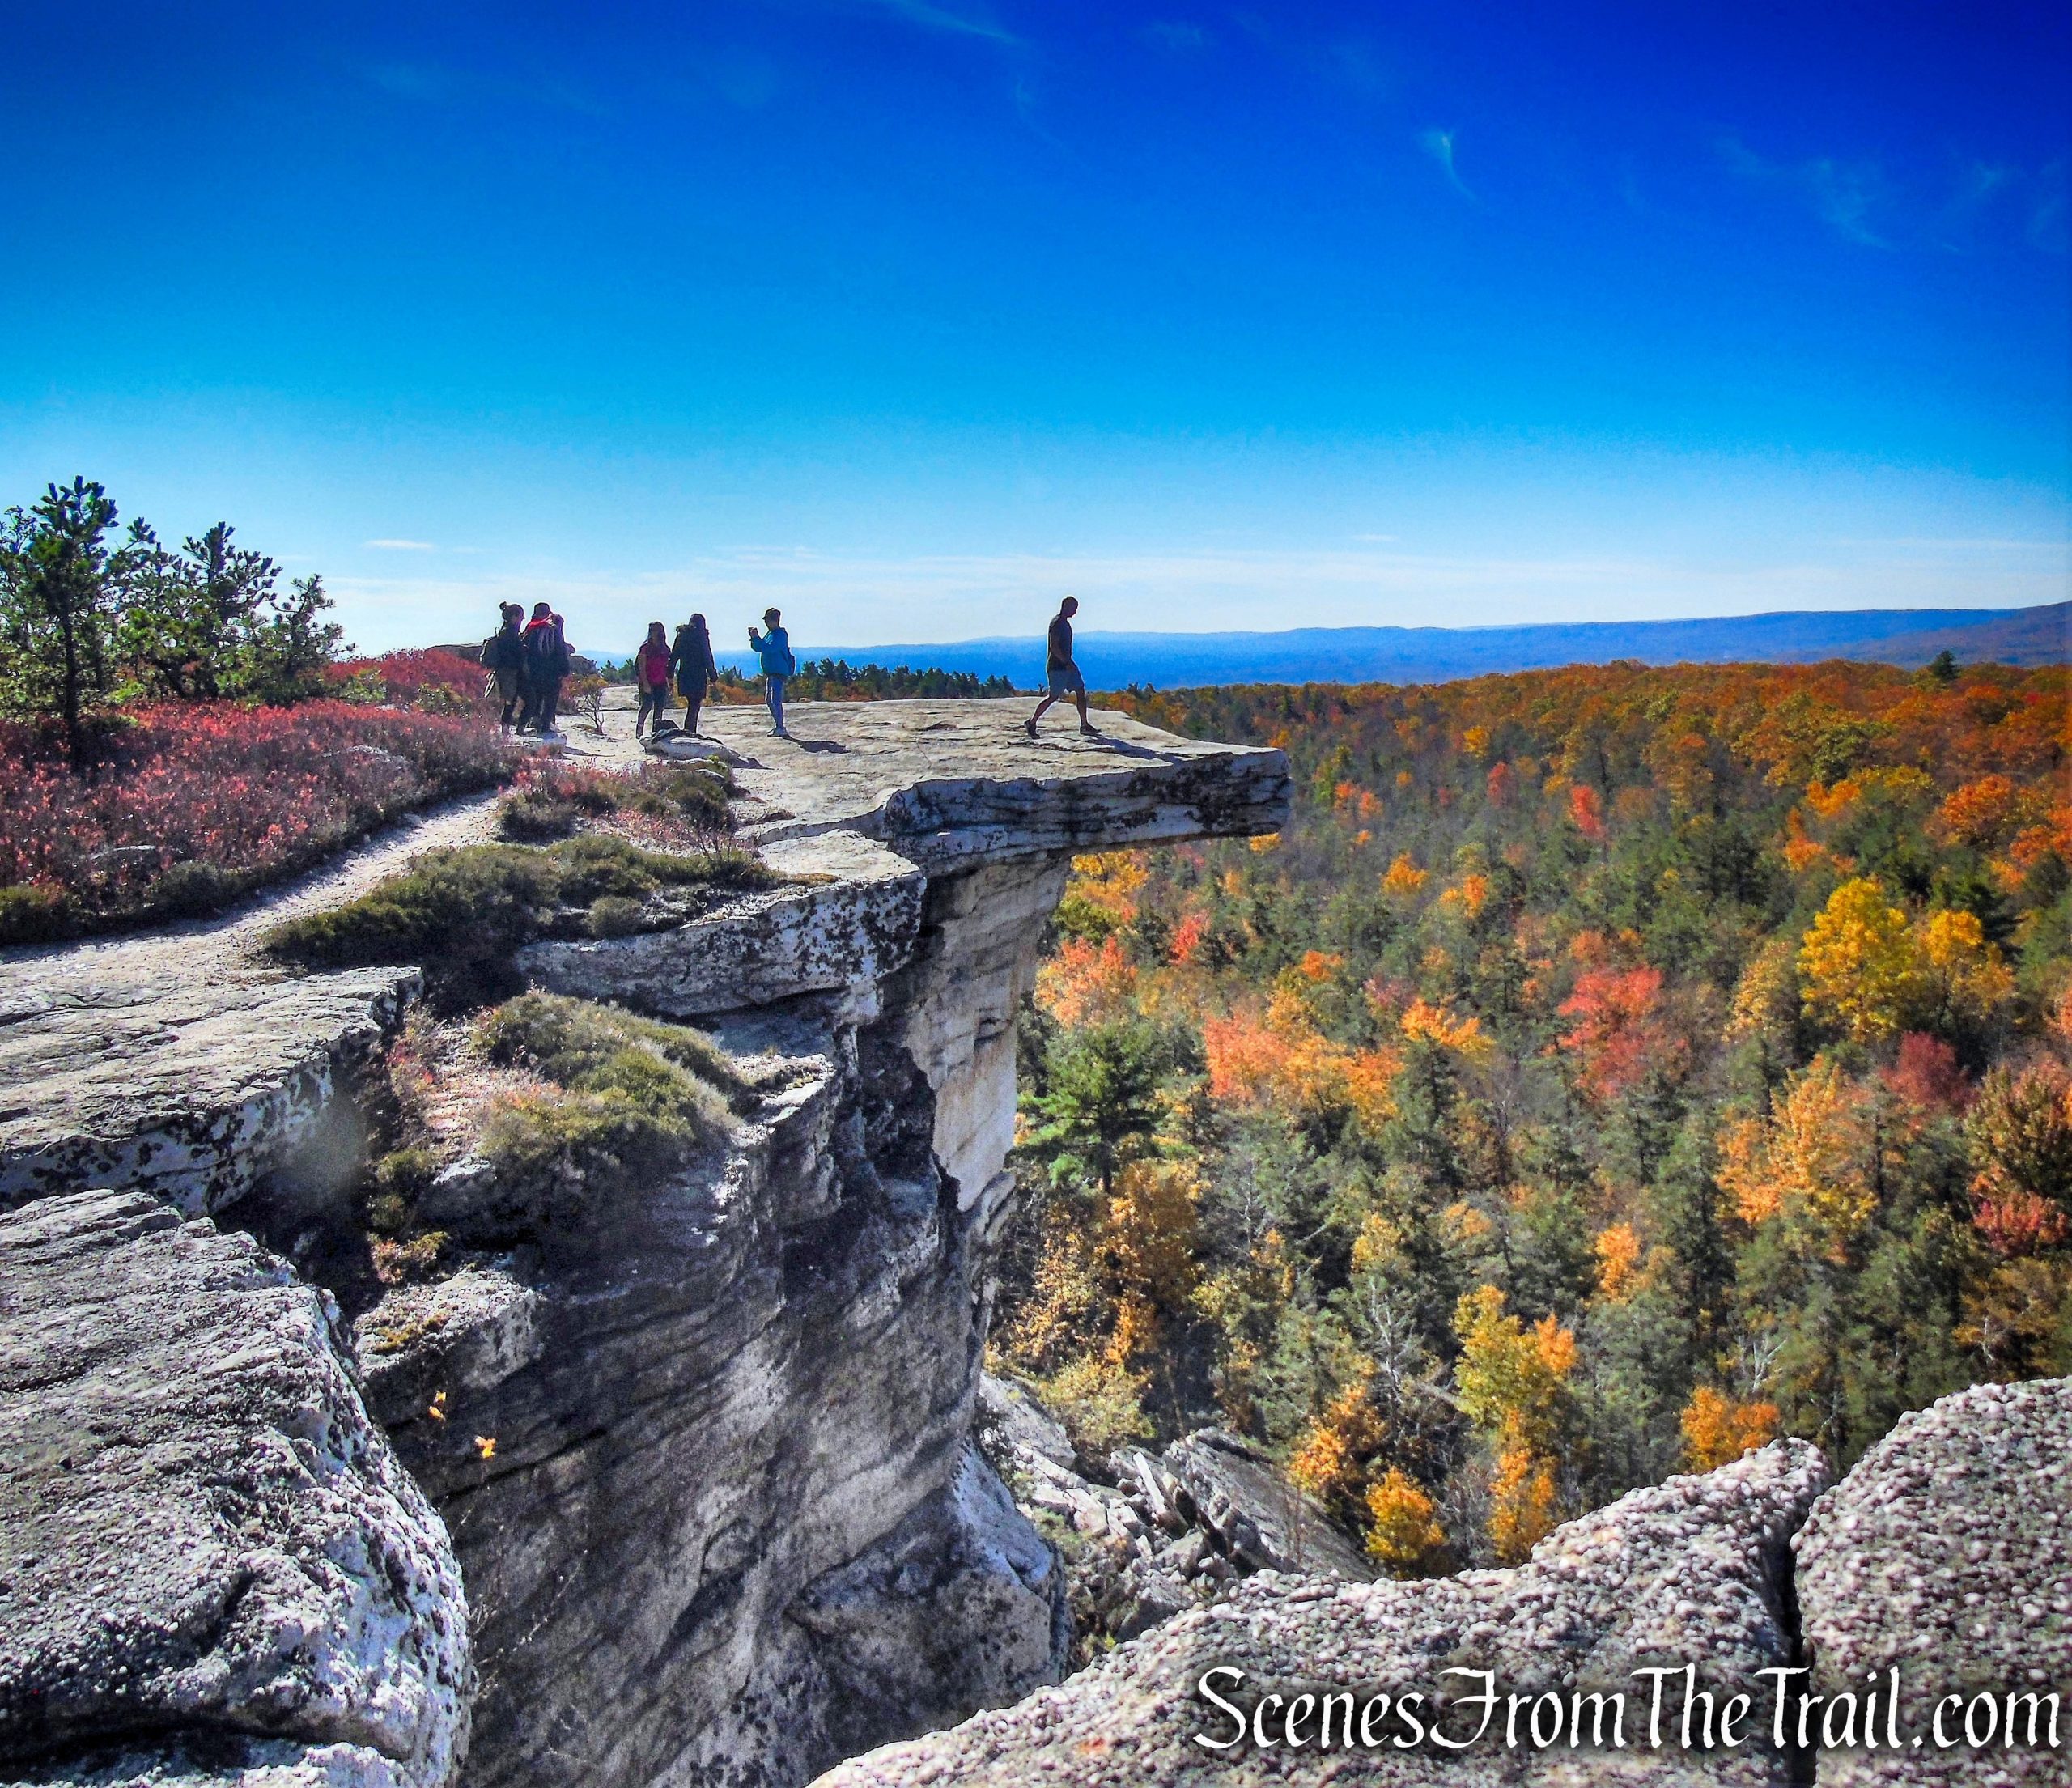 Safely Explore Ulster County This Fall